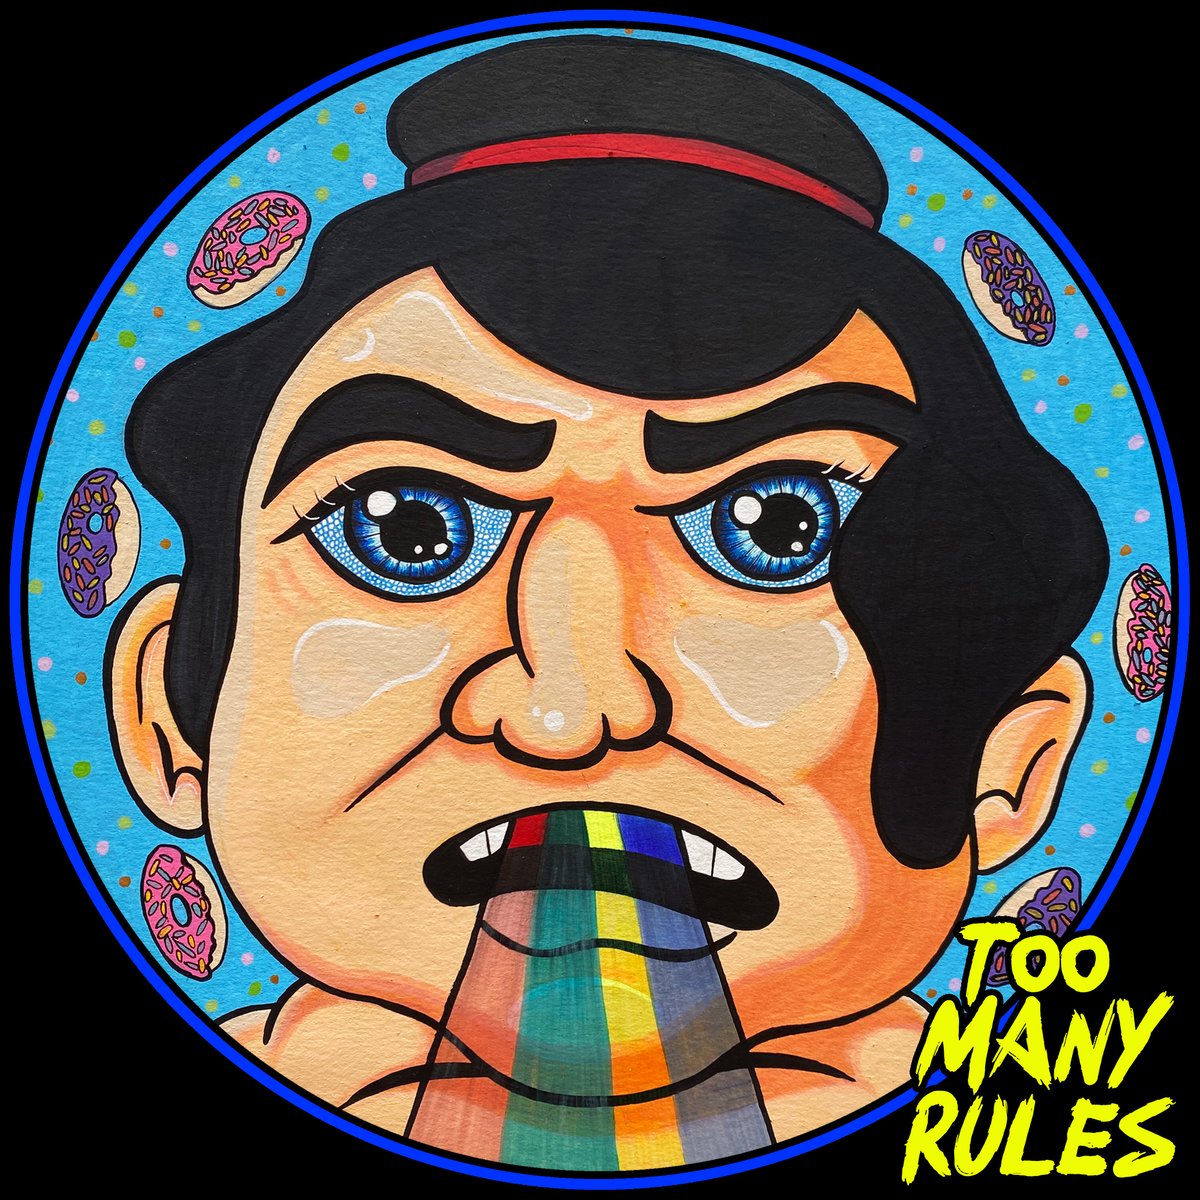 Too Many Rules 094

Beatport pre-order: https://t.co/5XPm2bgjHW

NightFunk, Jenny Voss - Play By My Rules 

Illustration by ZYCH_art

@nightfunkoff @beatport https://t.co/PsjP2bAO9z